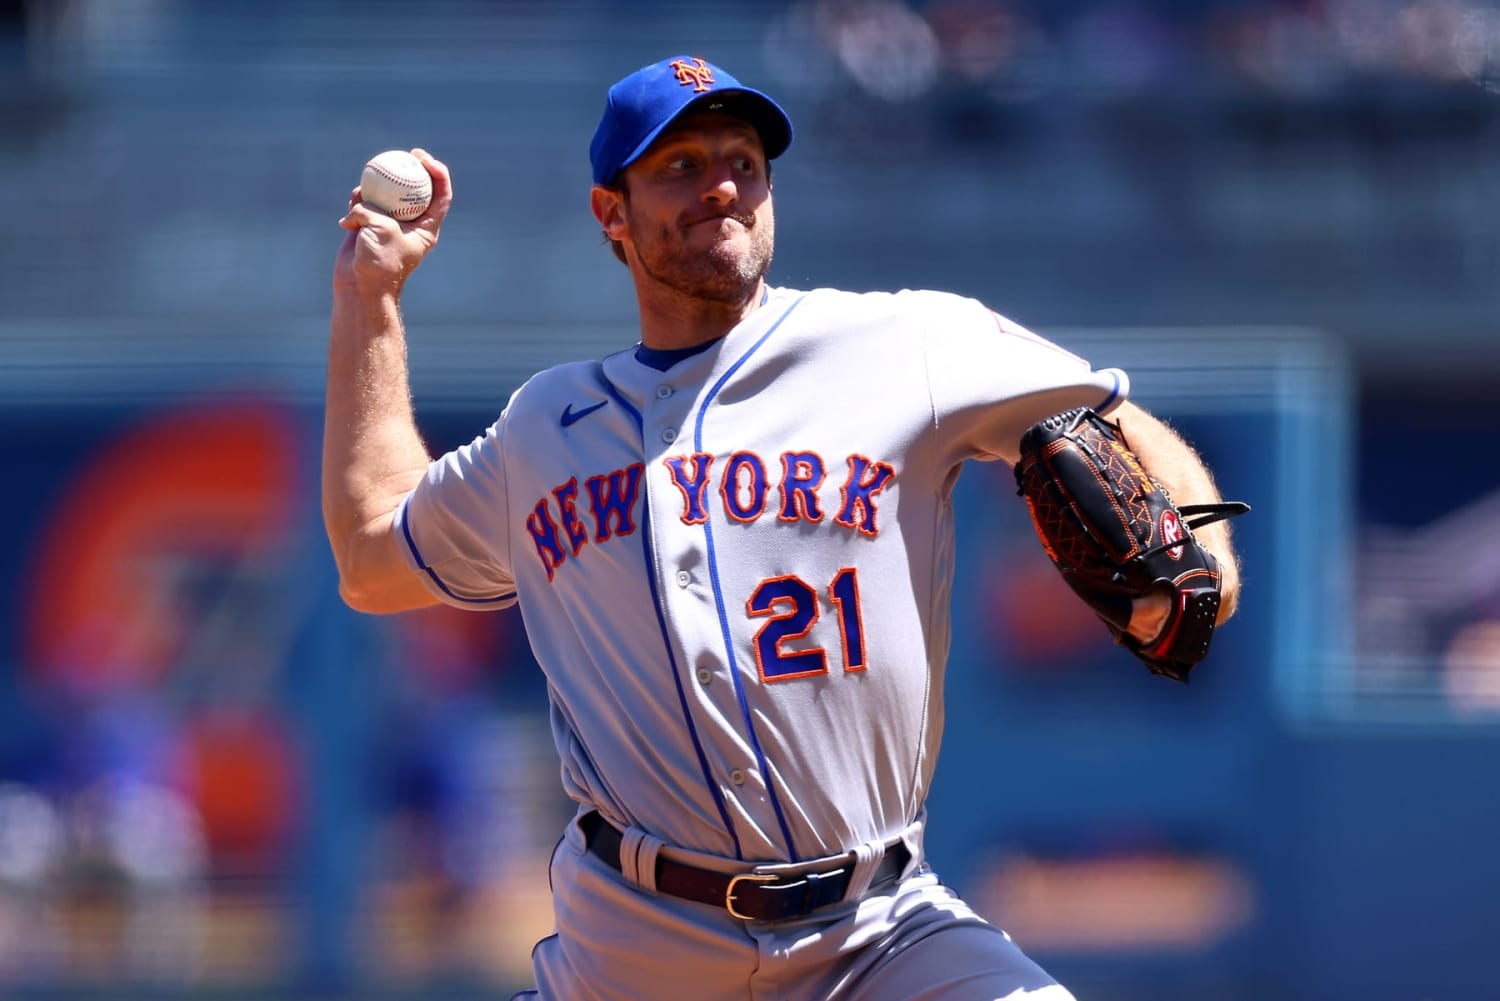 This Week in Mets Quotes: Max is mad at the umps and hanging